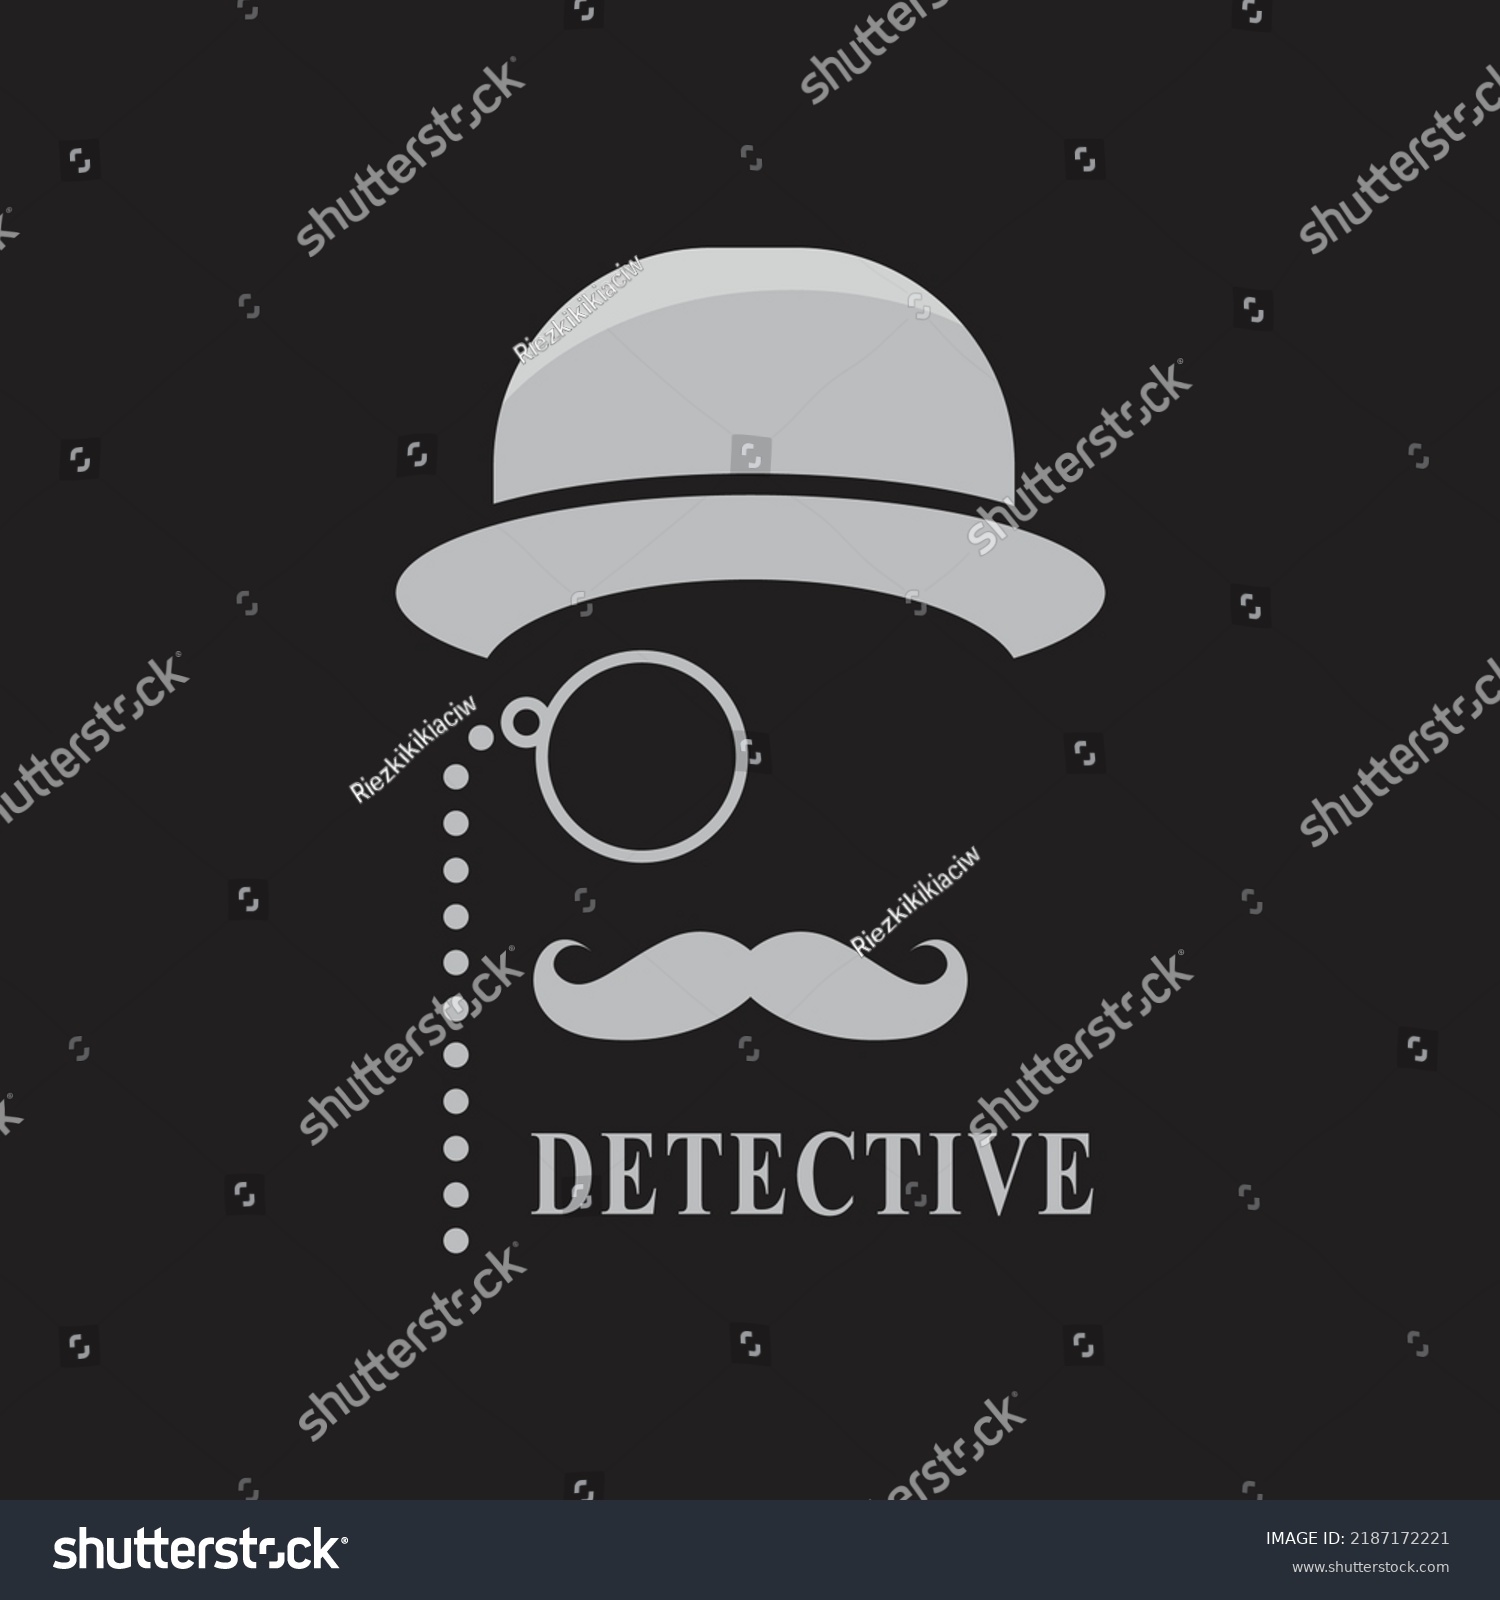 SVG of Icon of man in hat using old glasses. black and white shadow svg